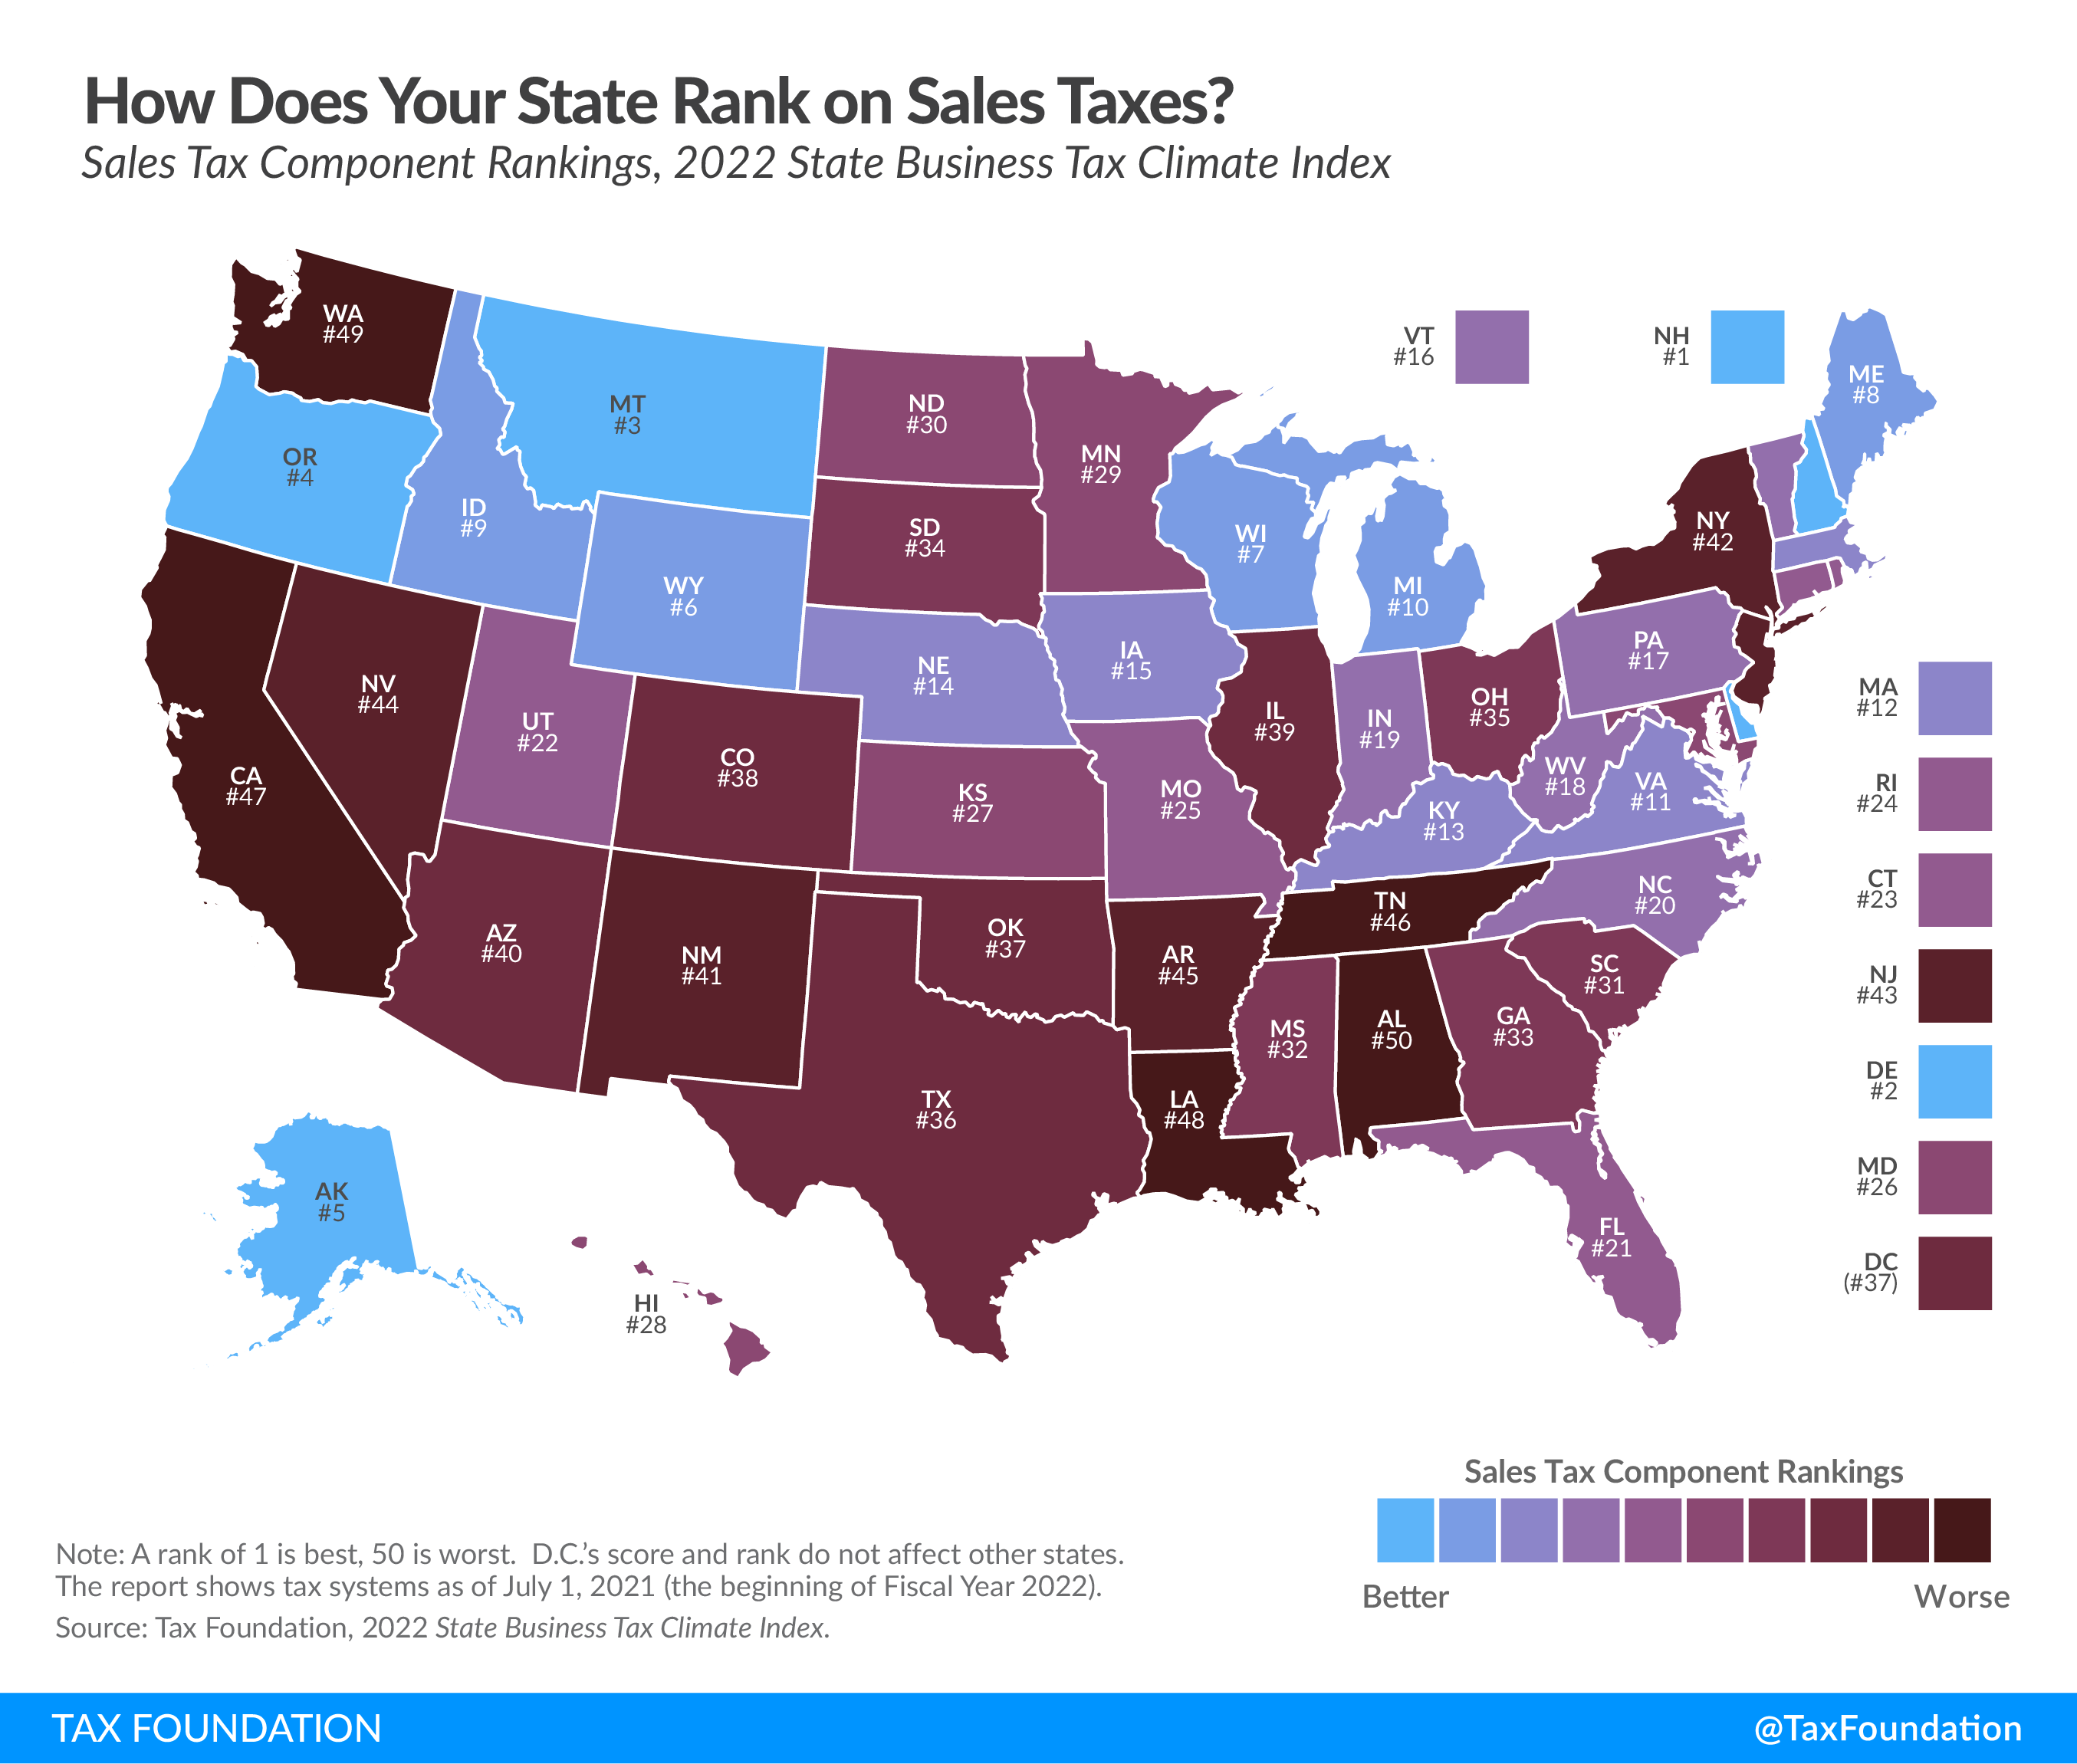 Ranking sales taxes on the State Business Tax Climate Index See 2022 sales tax rankings to see how your state ranks on sales taxes